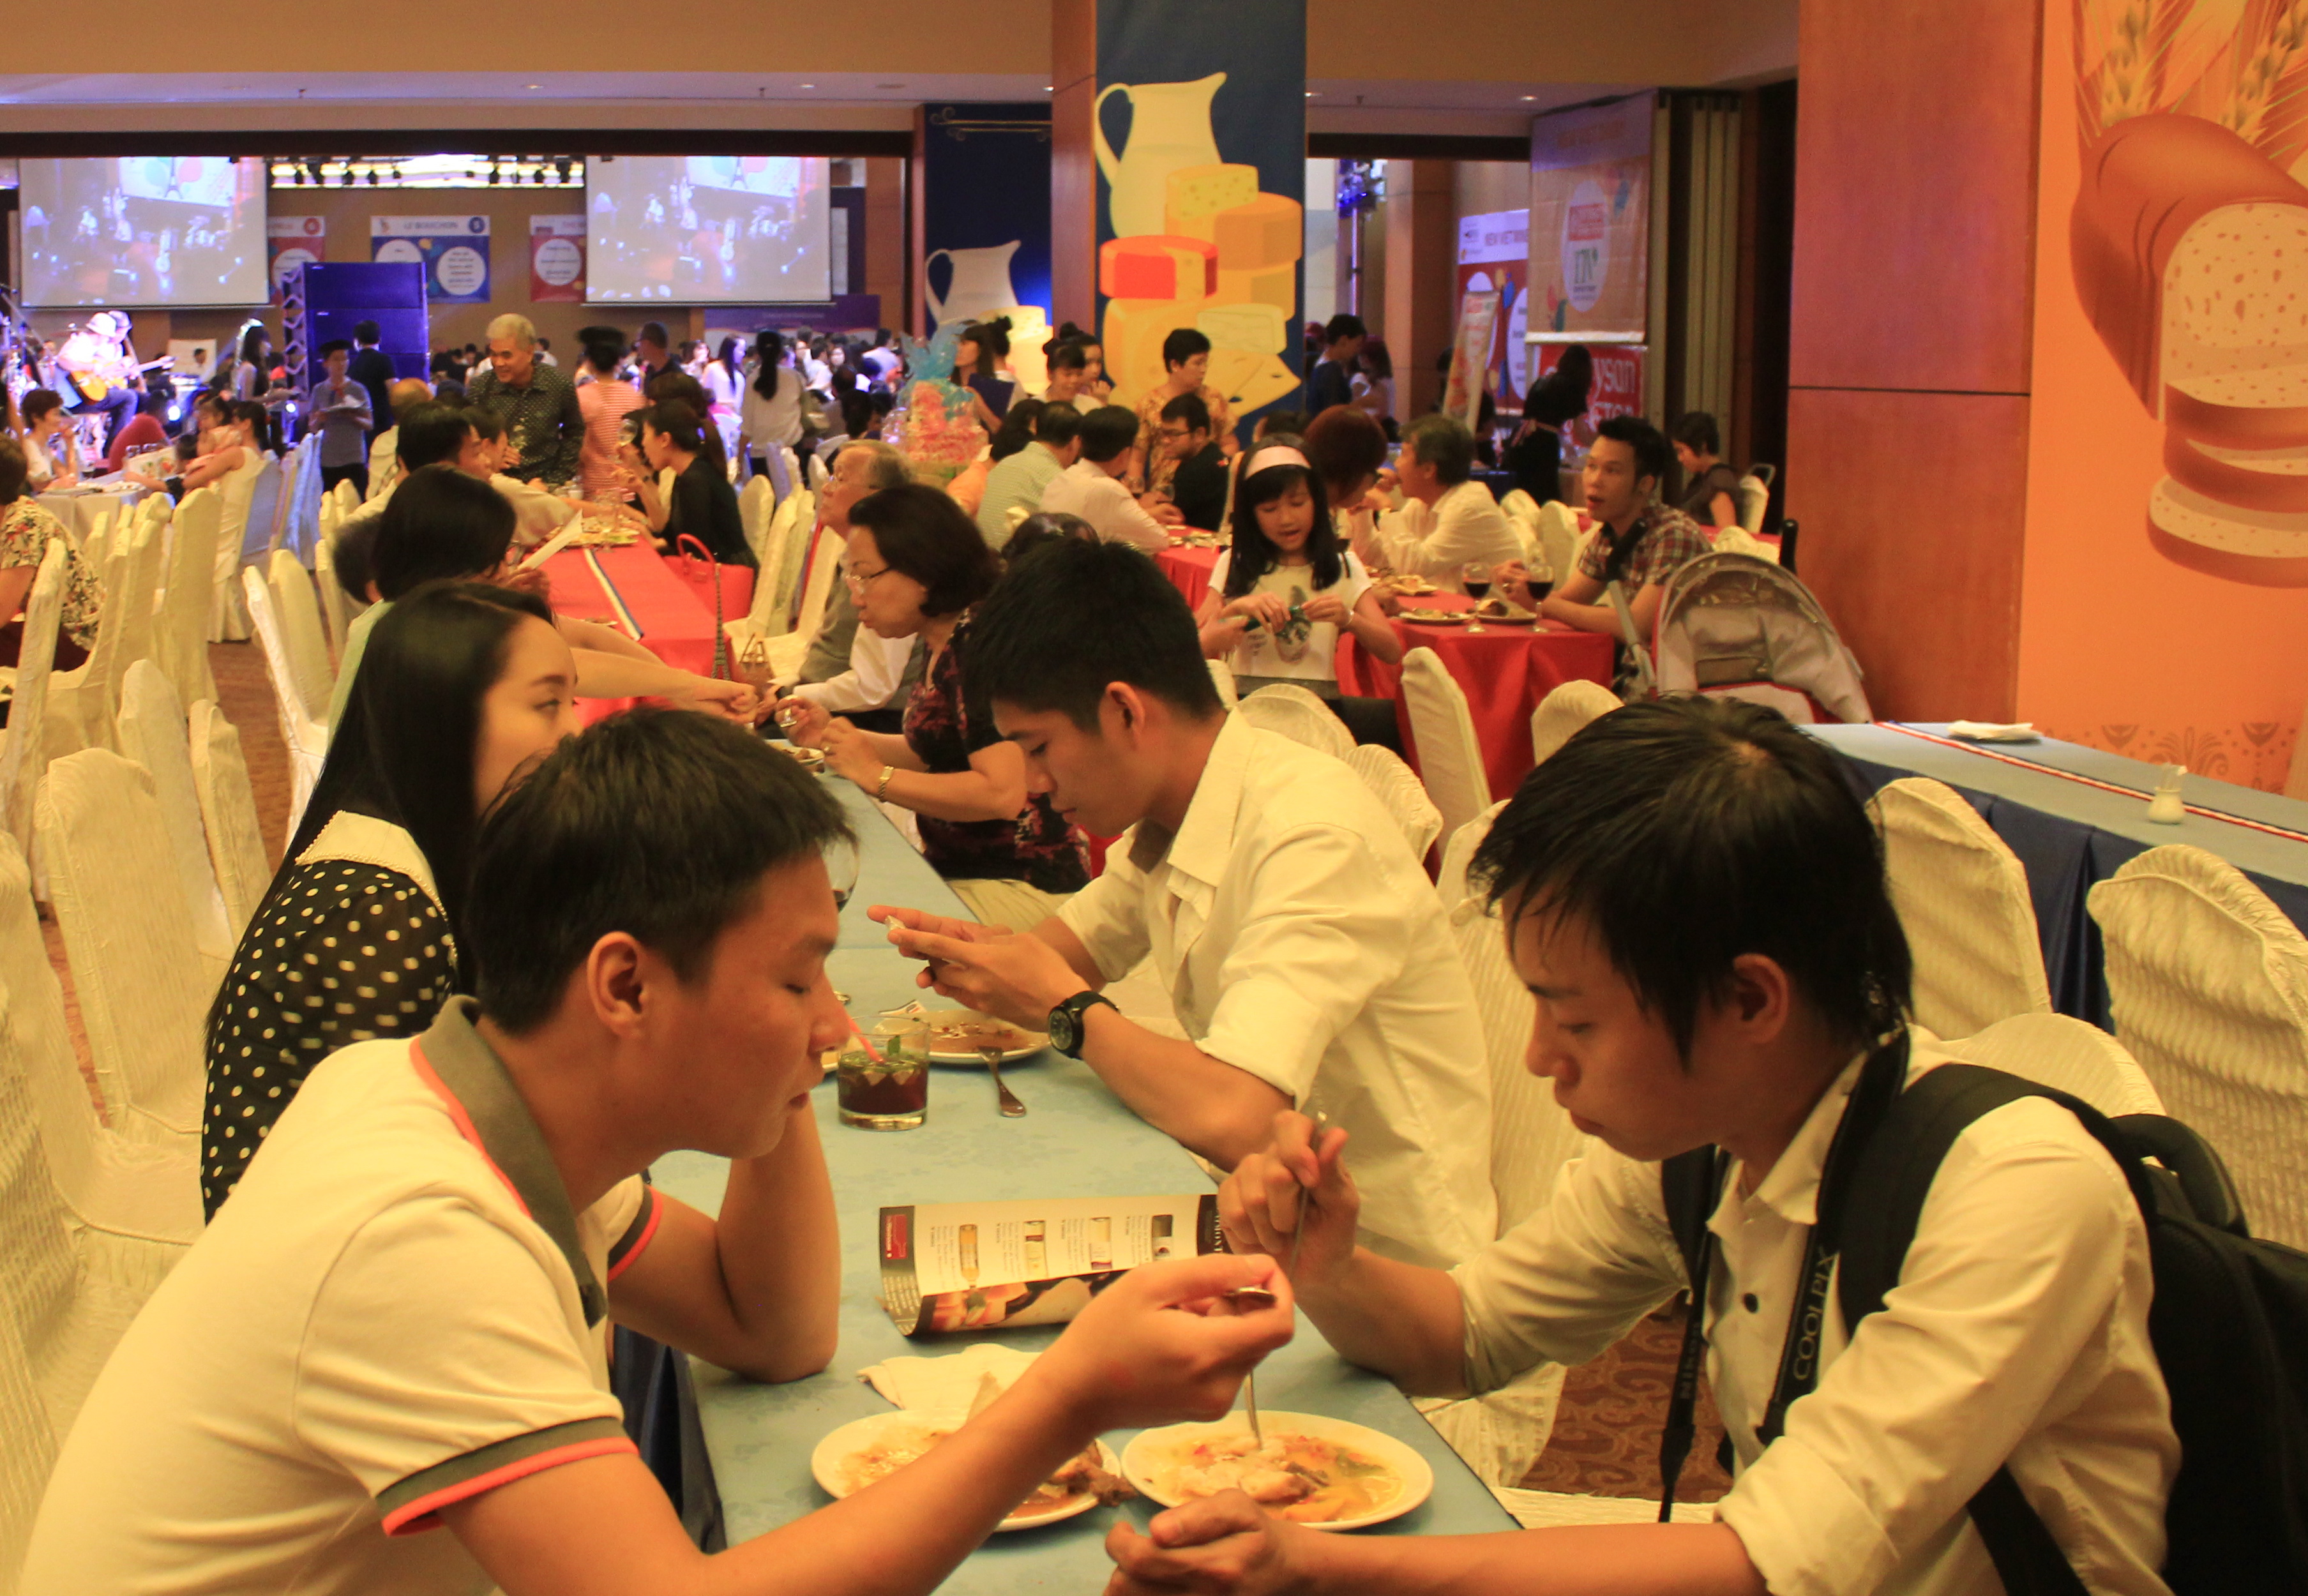 Balade en France 2014 kicks off in HCMC, hopes to attract thousands of diners